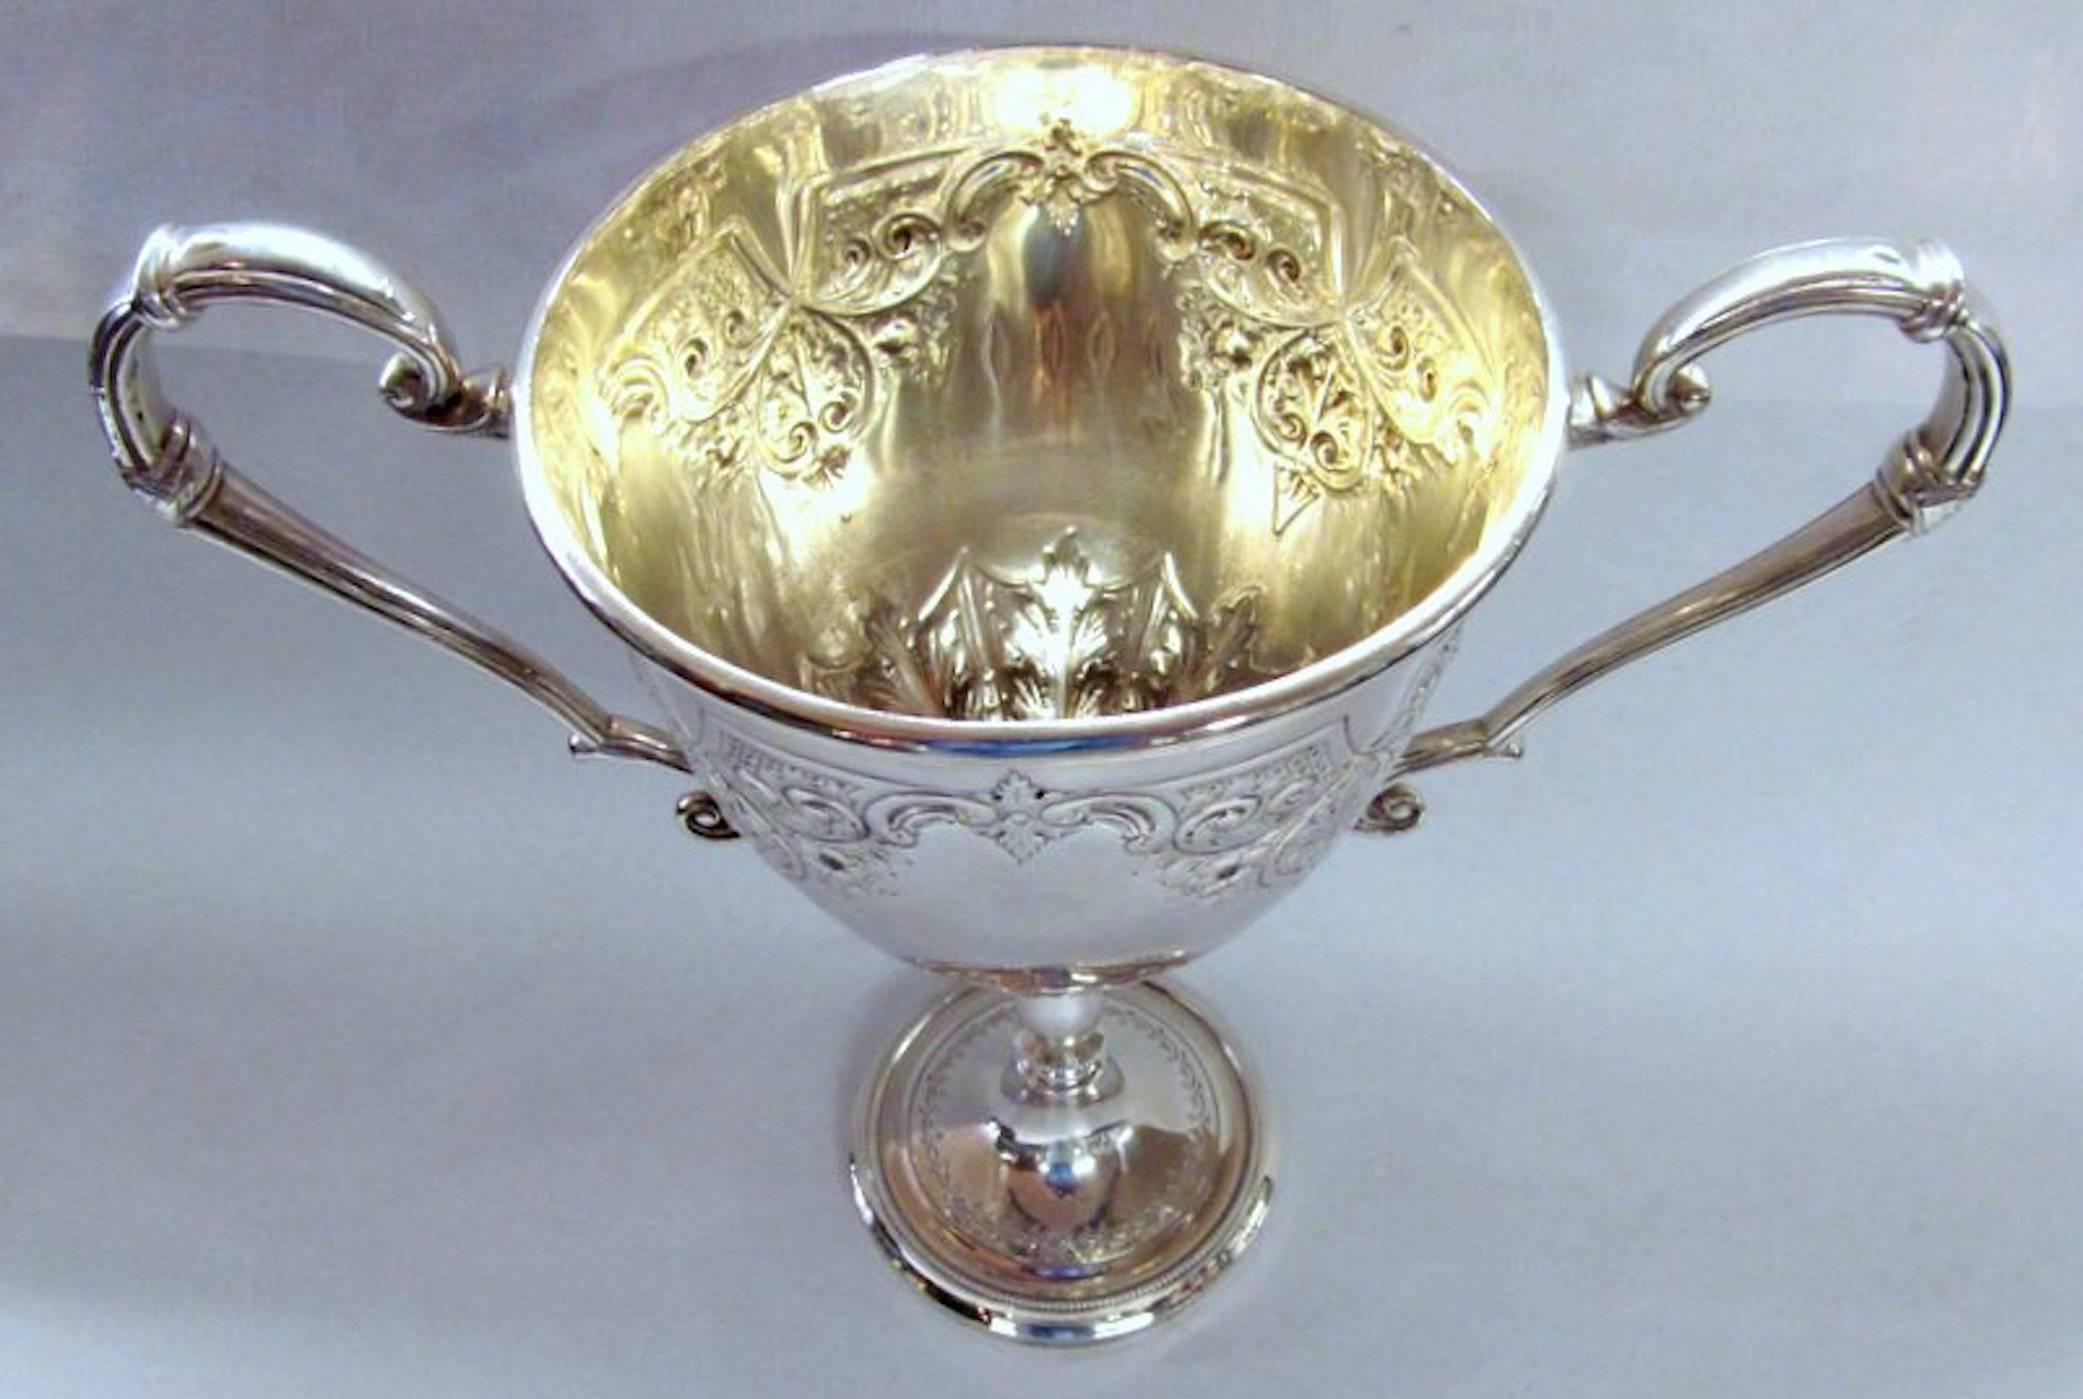 Repoussé Antique English Sheffield Silver Plate Hand Chased Two-Handle Loving/Trophy Cup